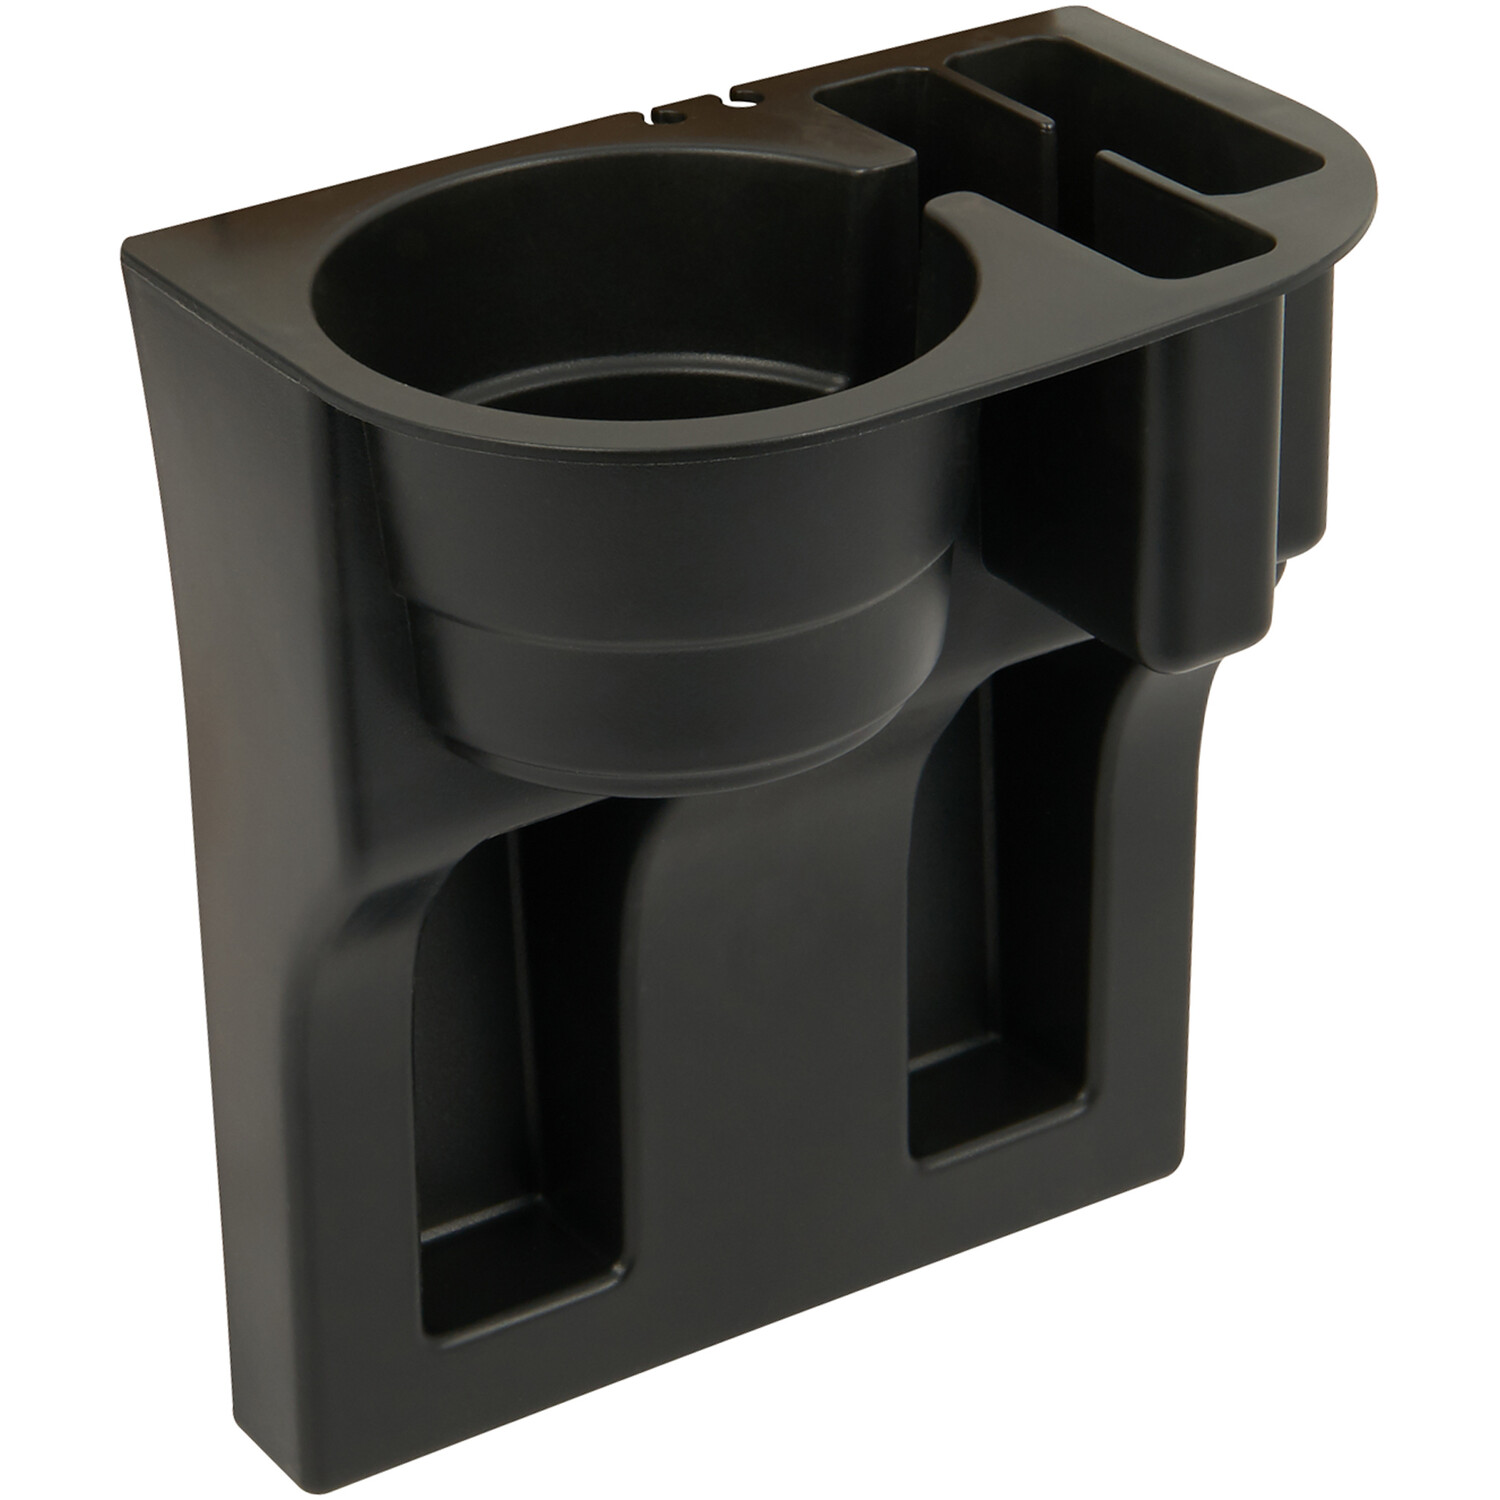 Carkit Device Organiser with Cup Holder Image 4